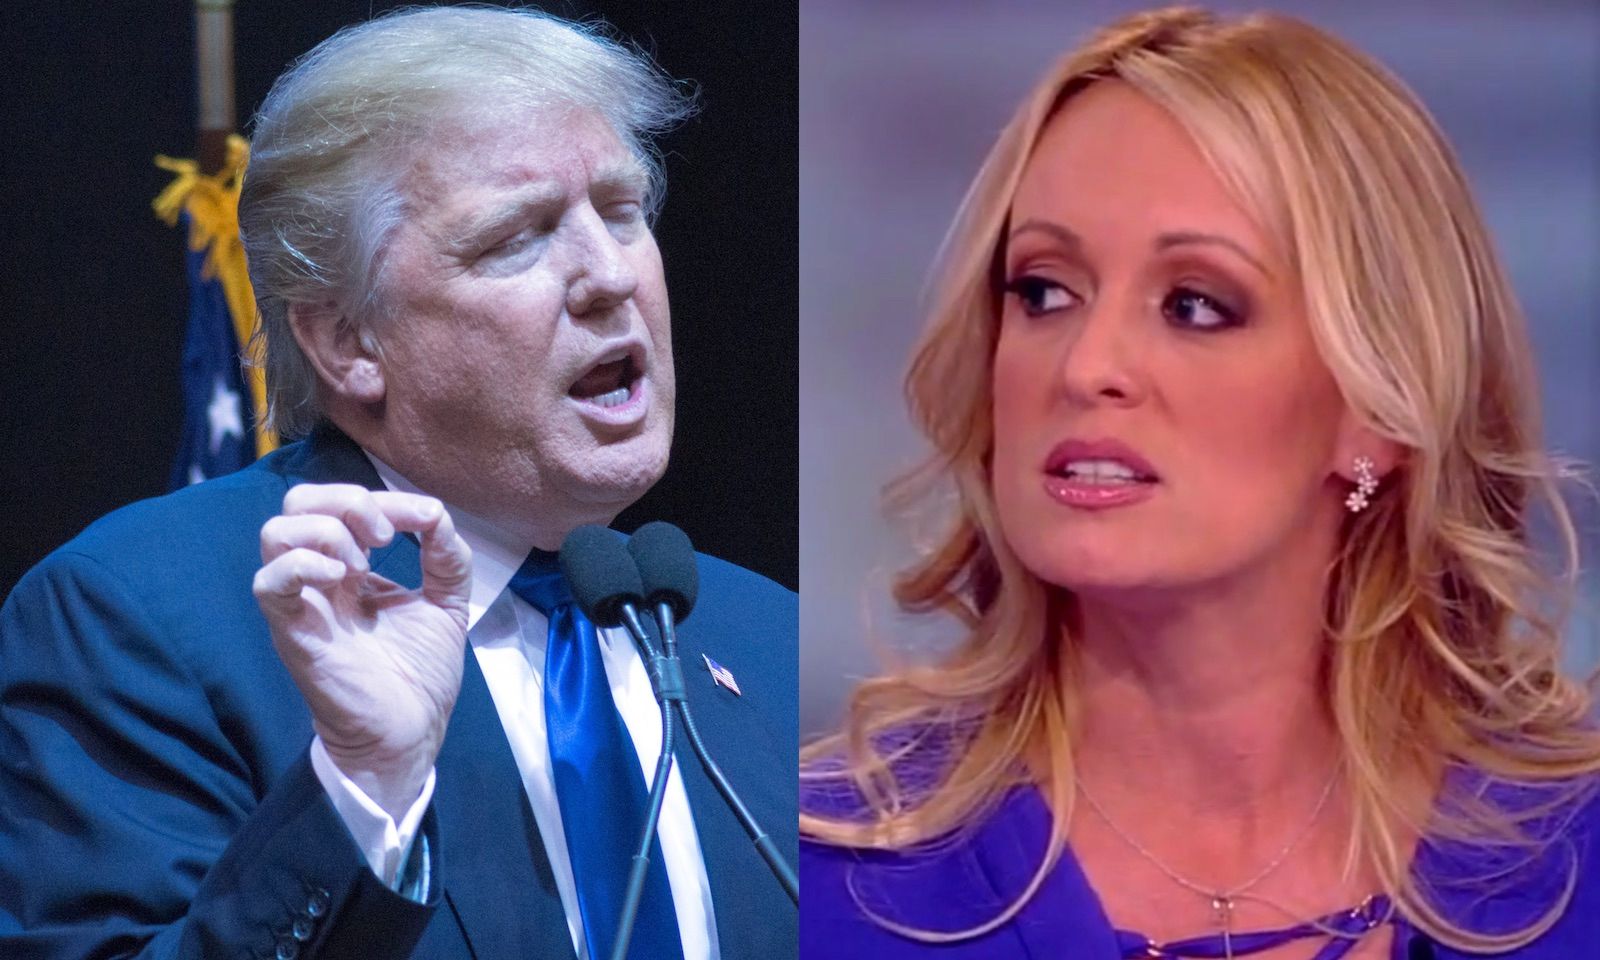 Donald Trump Ridicules Stormy Daniels ‘Threat’ Sketch On Twitter